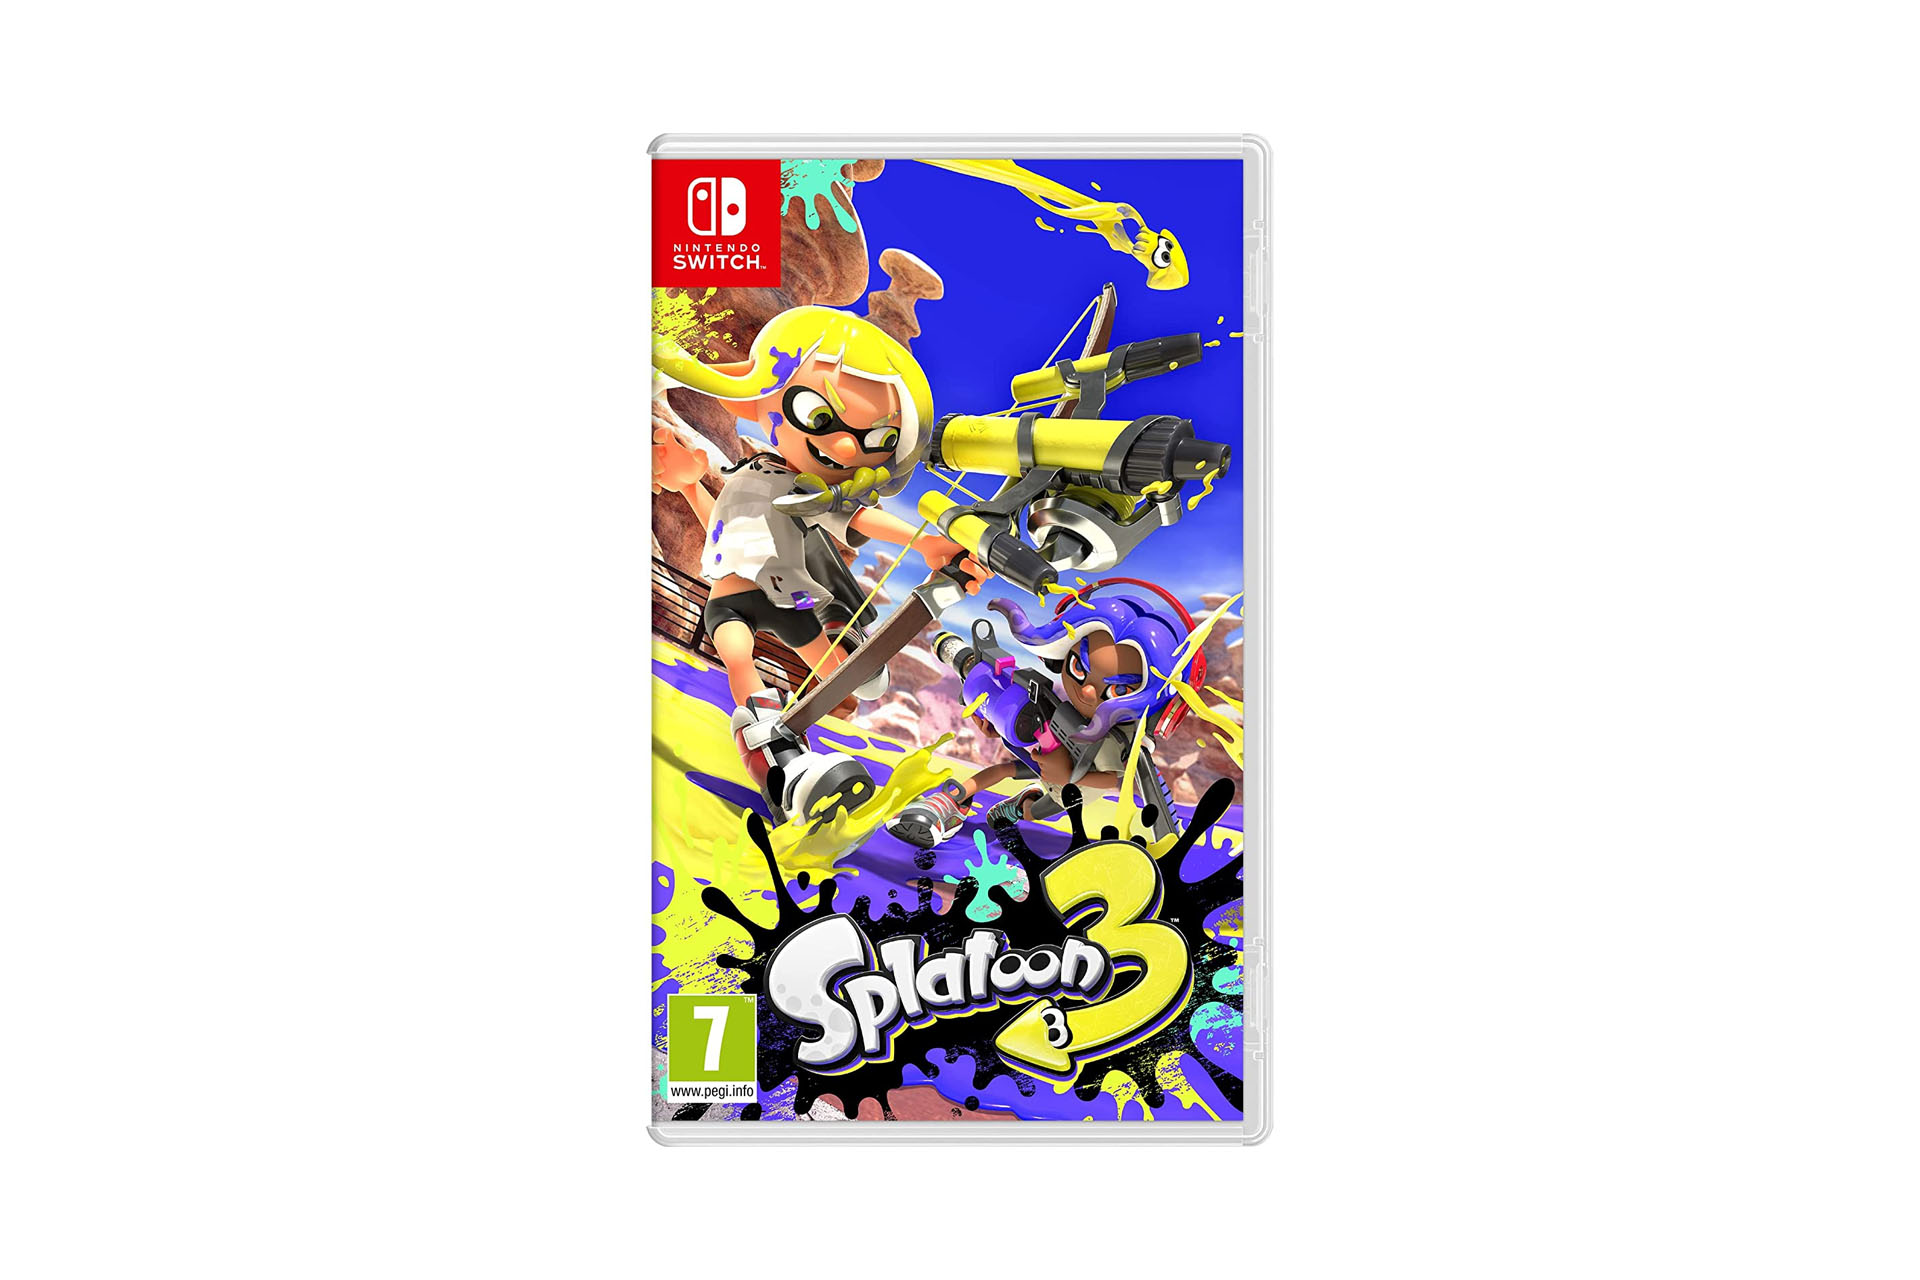 A product shot of Splatoon 3 on the Nintendo Switch